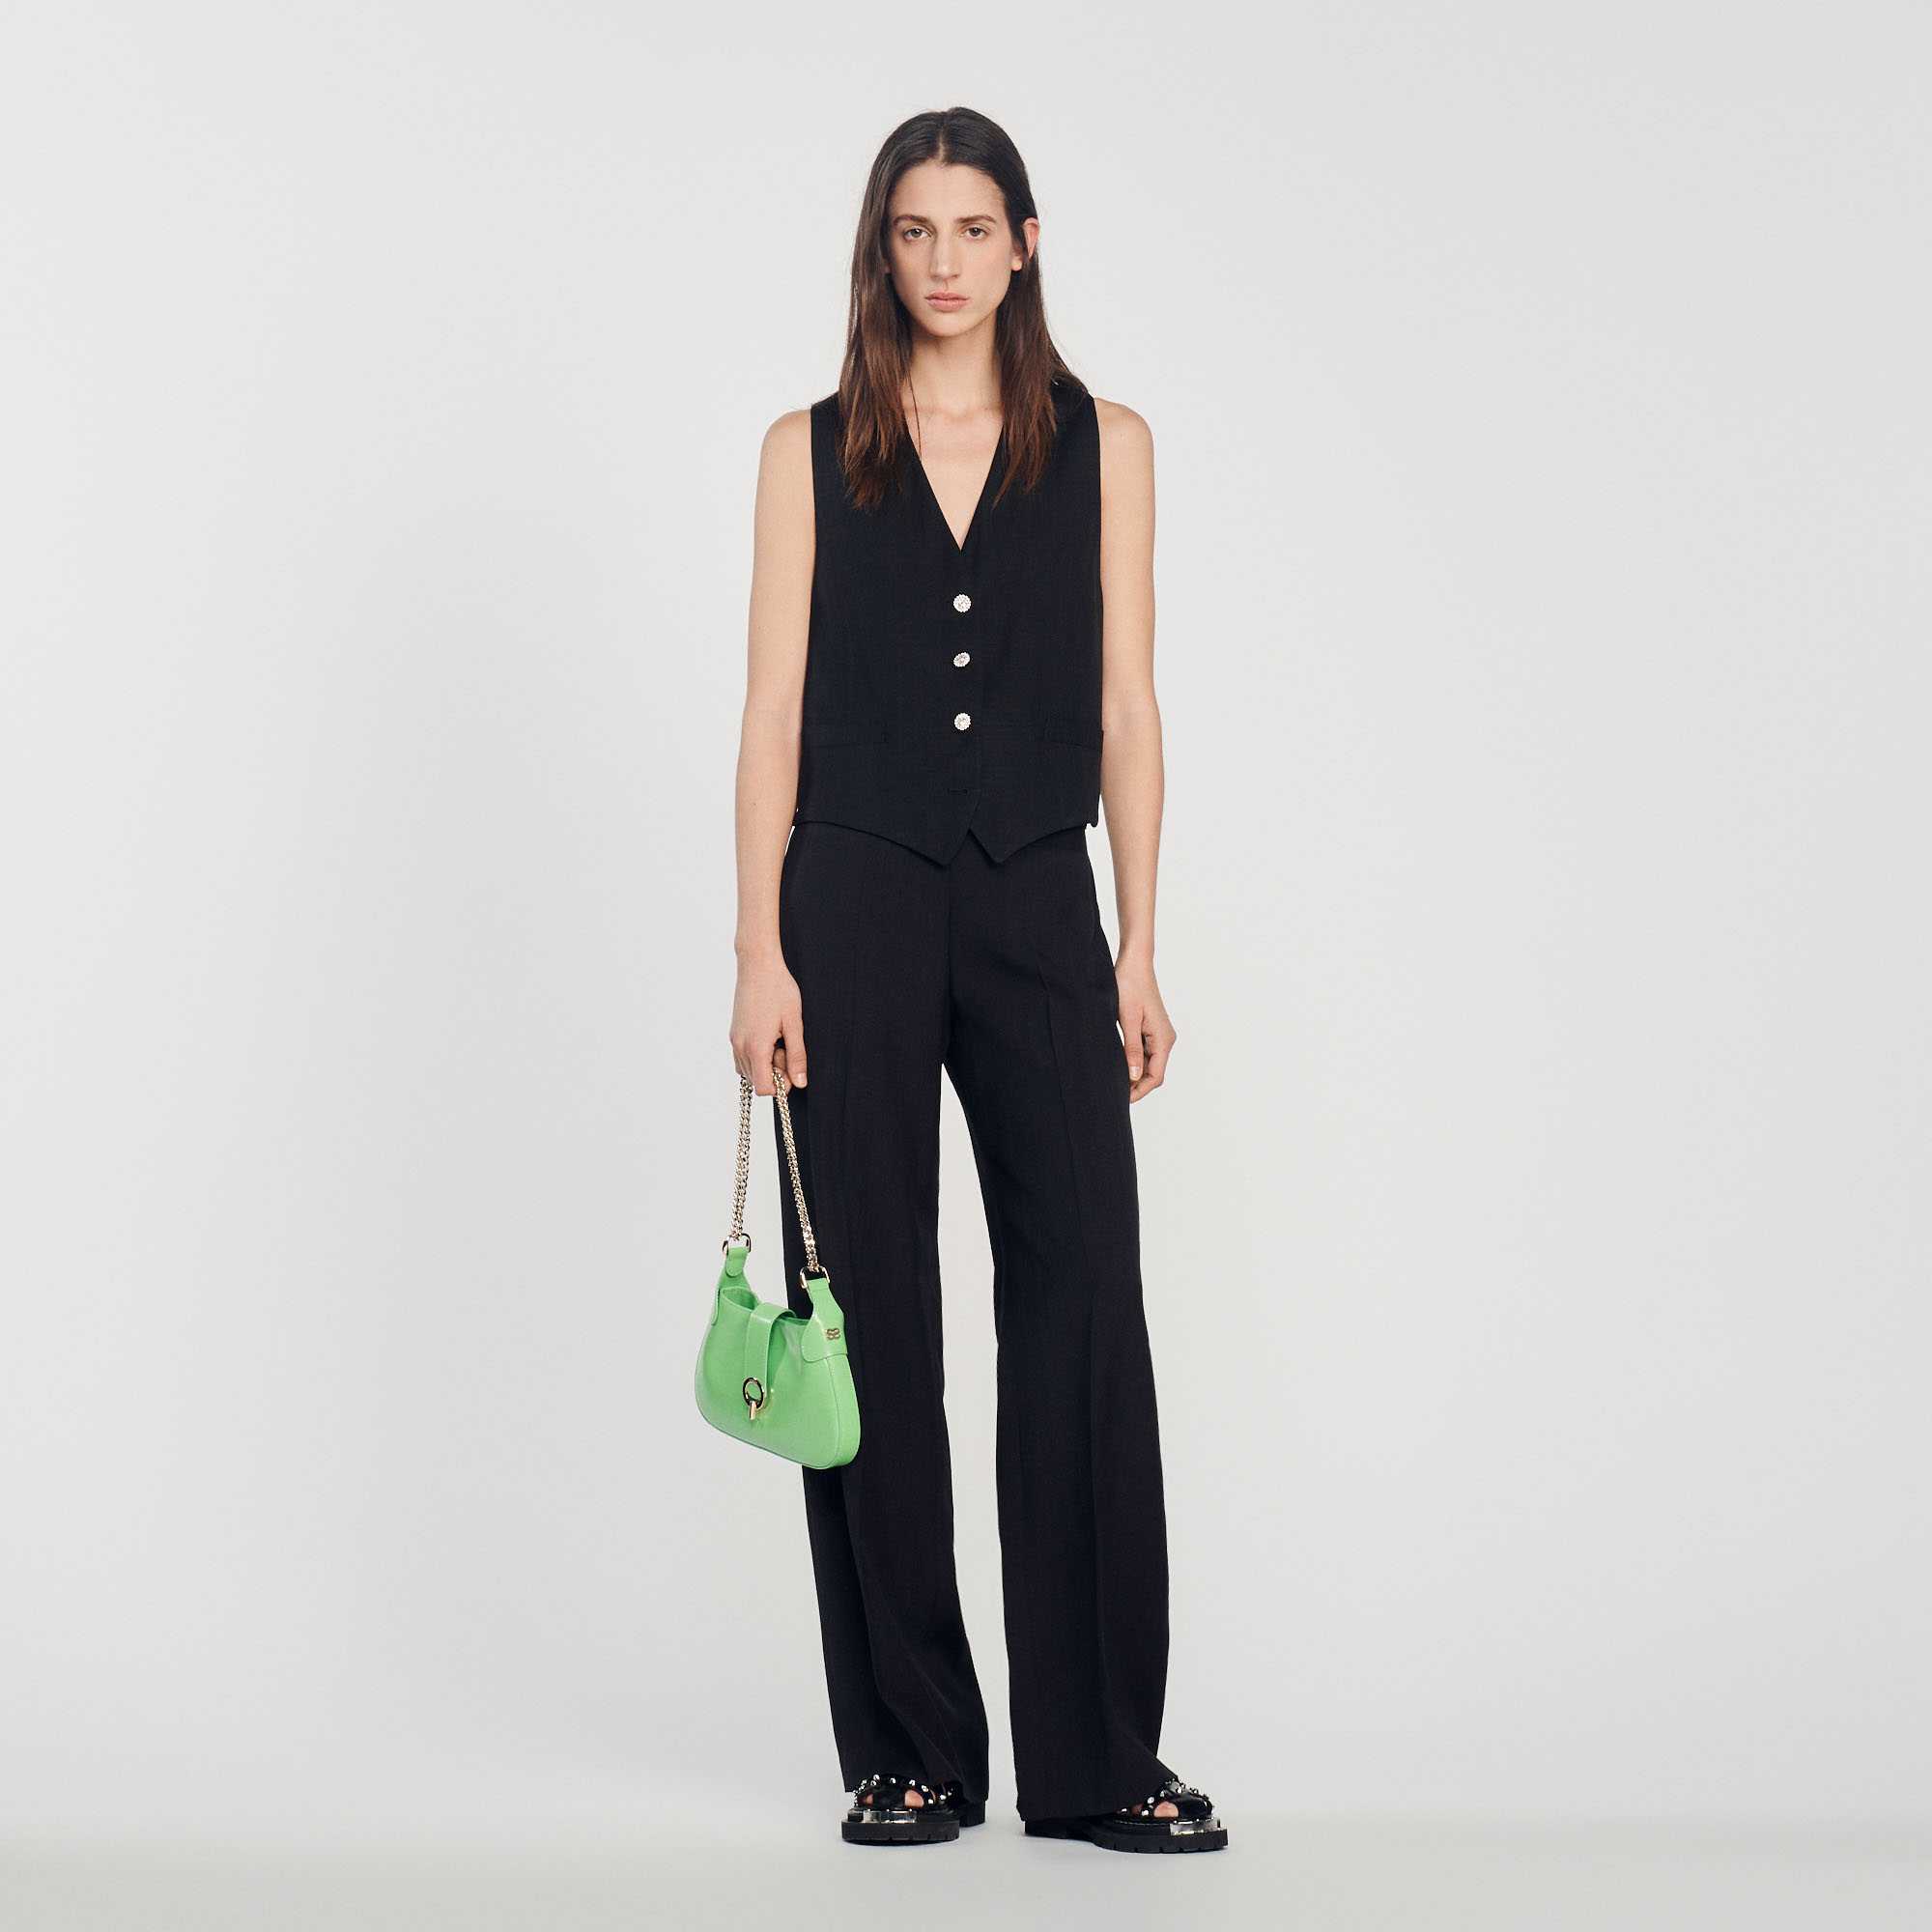 Sandro viscose Belt lining: Wide-leg pants with a high waist and piped side pockets